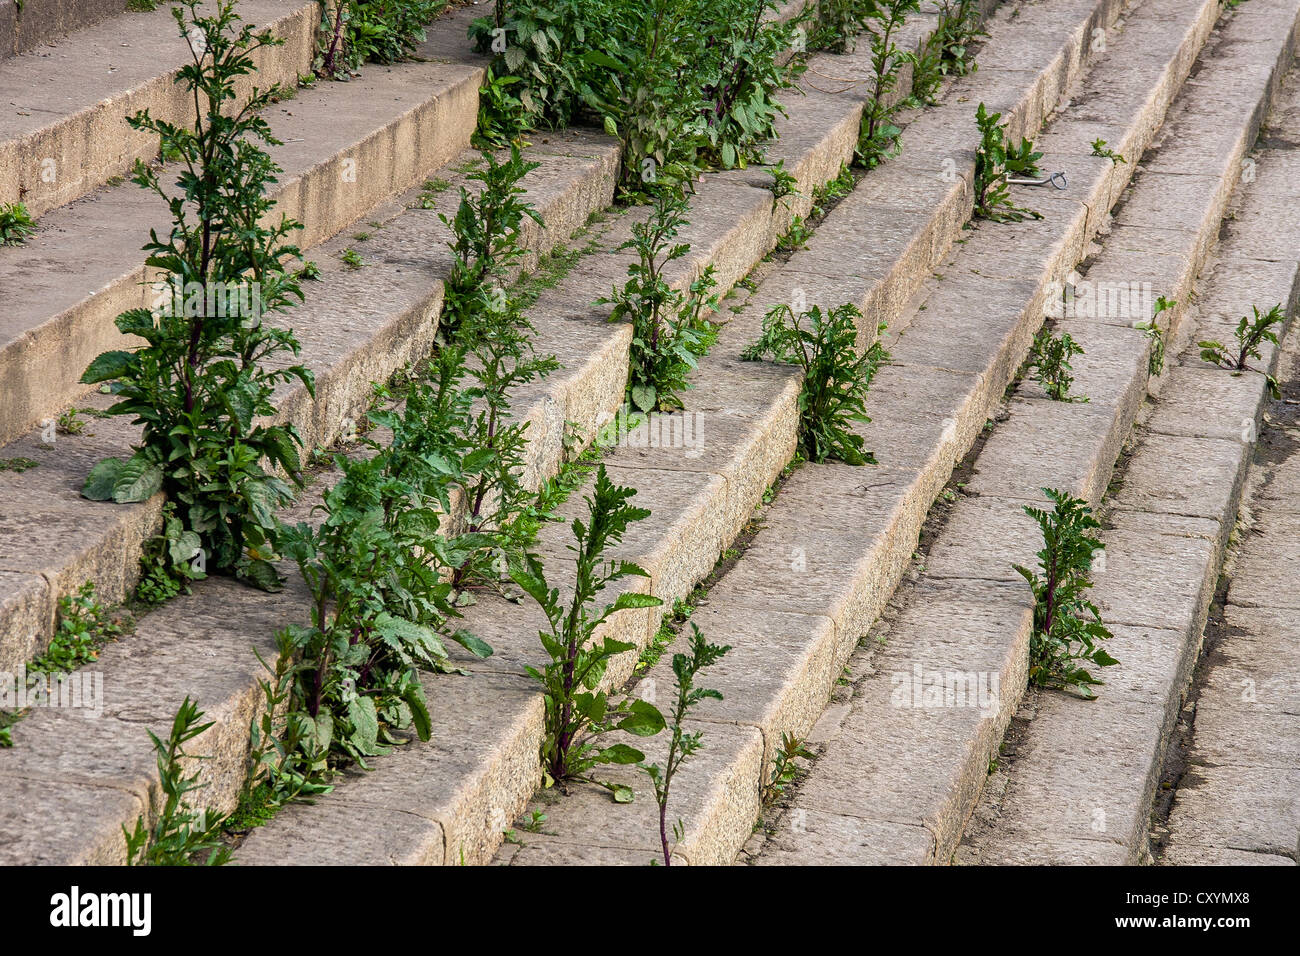 Weeds growing on steps Stock Photo